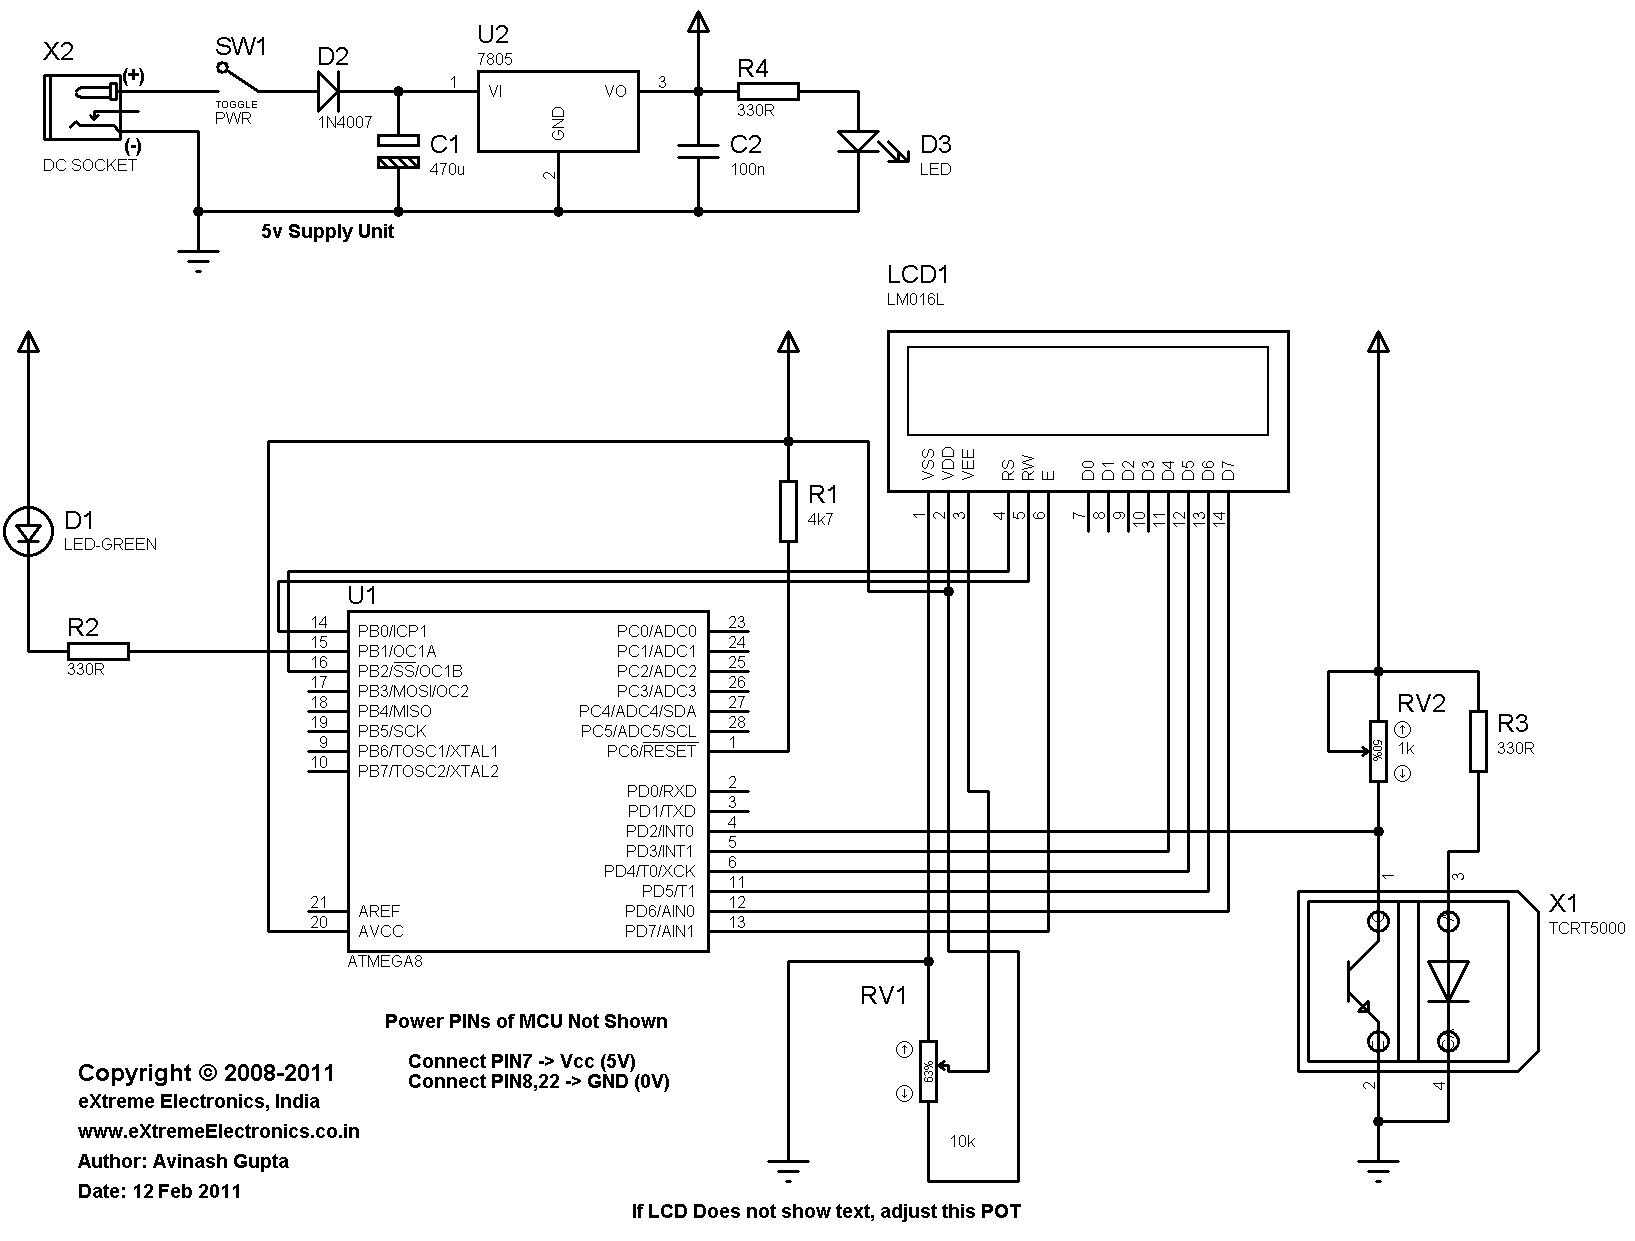 Rpm Schematic Diagram - Avr Project Atmega8 Based Rpm Meter Extreme Electronics Wiring Diagram - Rpm Schematic Diagram